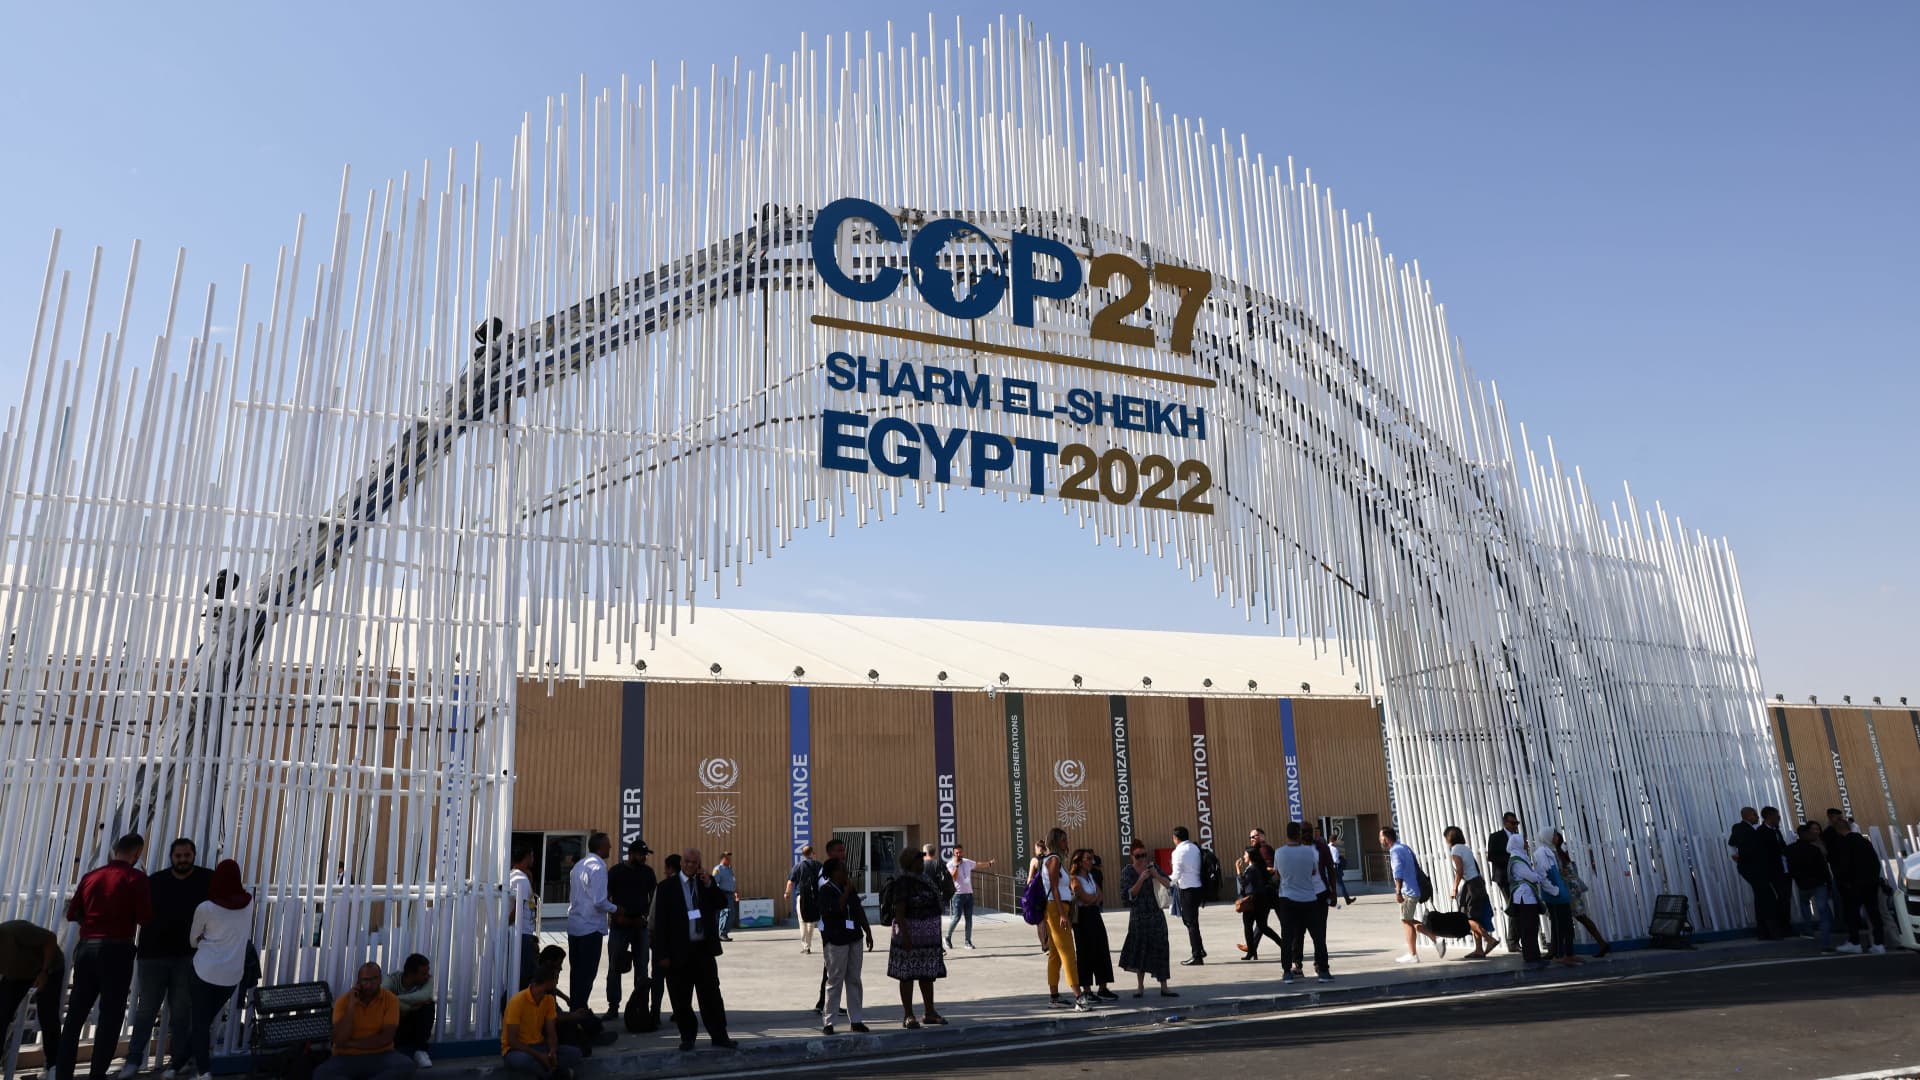 Flowing sewage, bewildering signs, lack of water: COP27 faces logistics nightmares